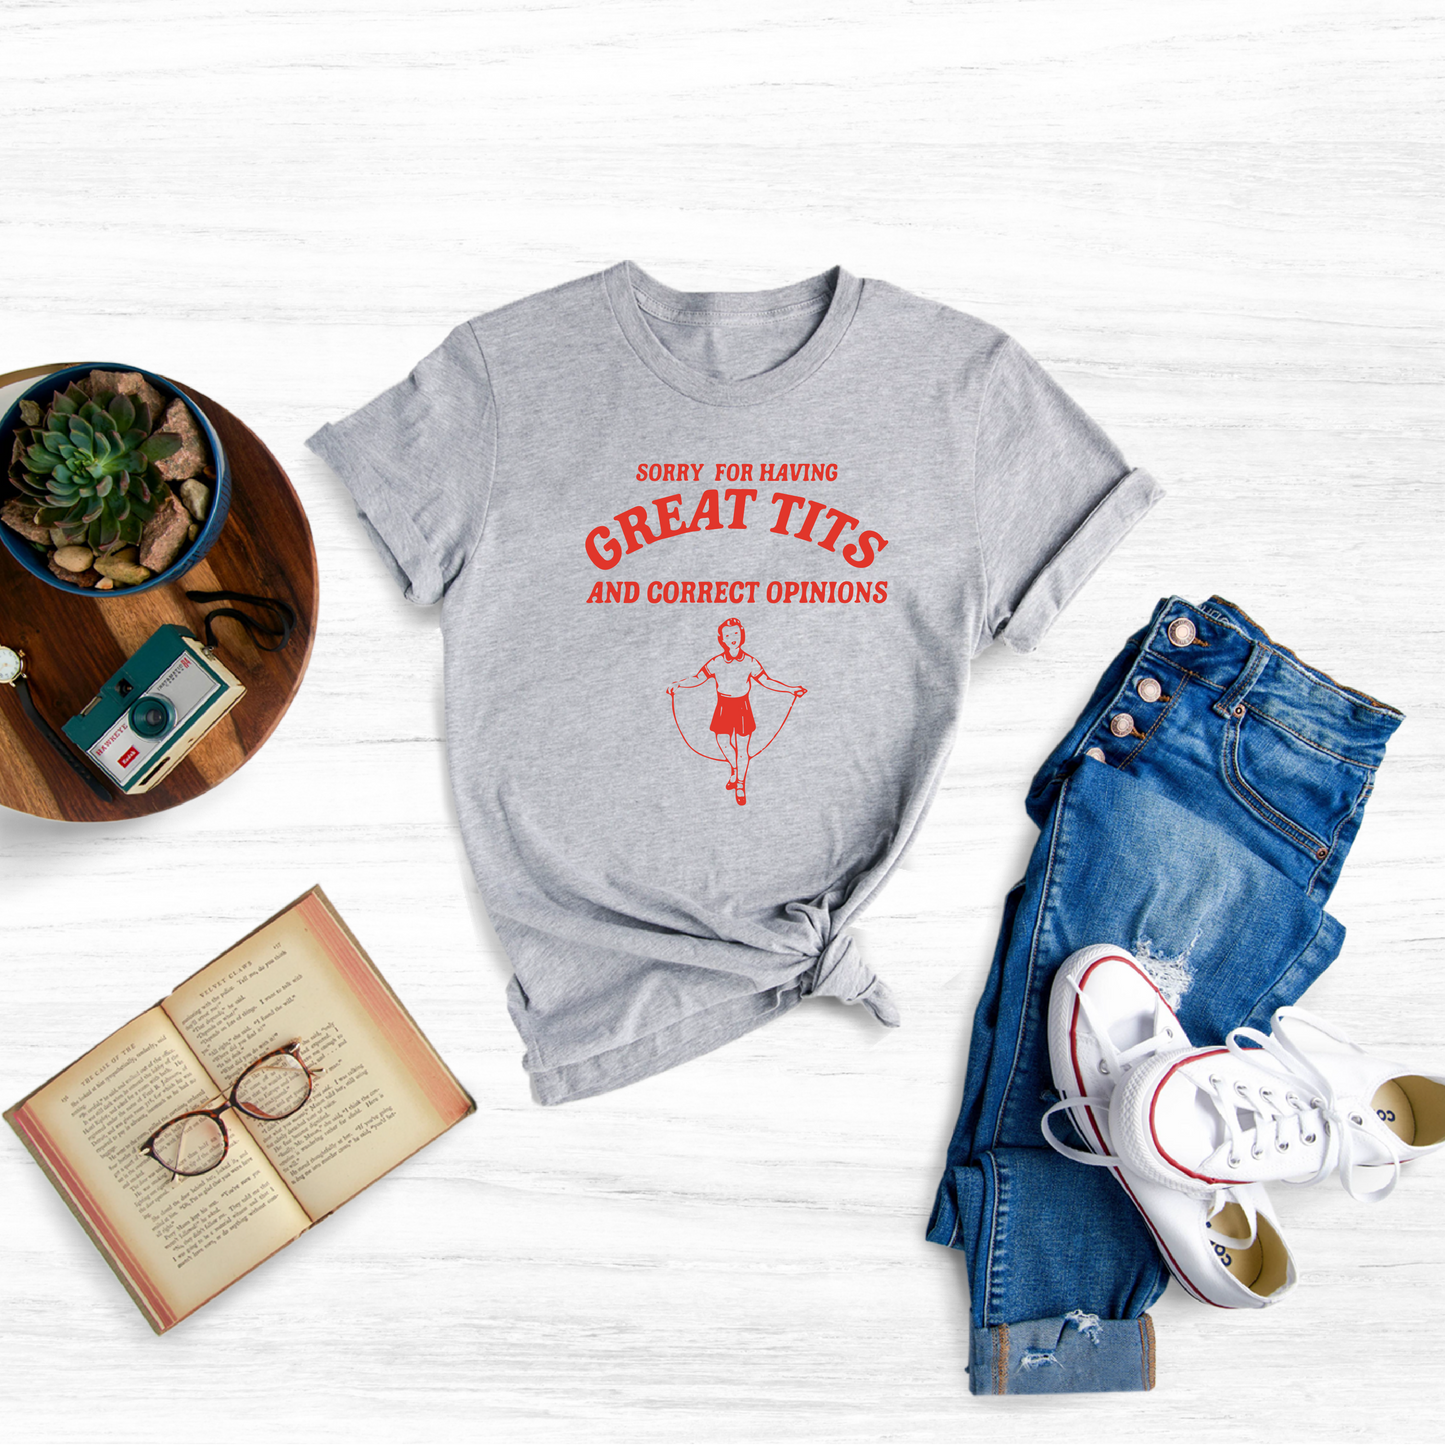 Show your excitement for your upcoming cruise Make a statement about your love of travel and adventure Create lasting memories of your cruise vacation